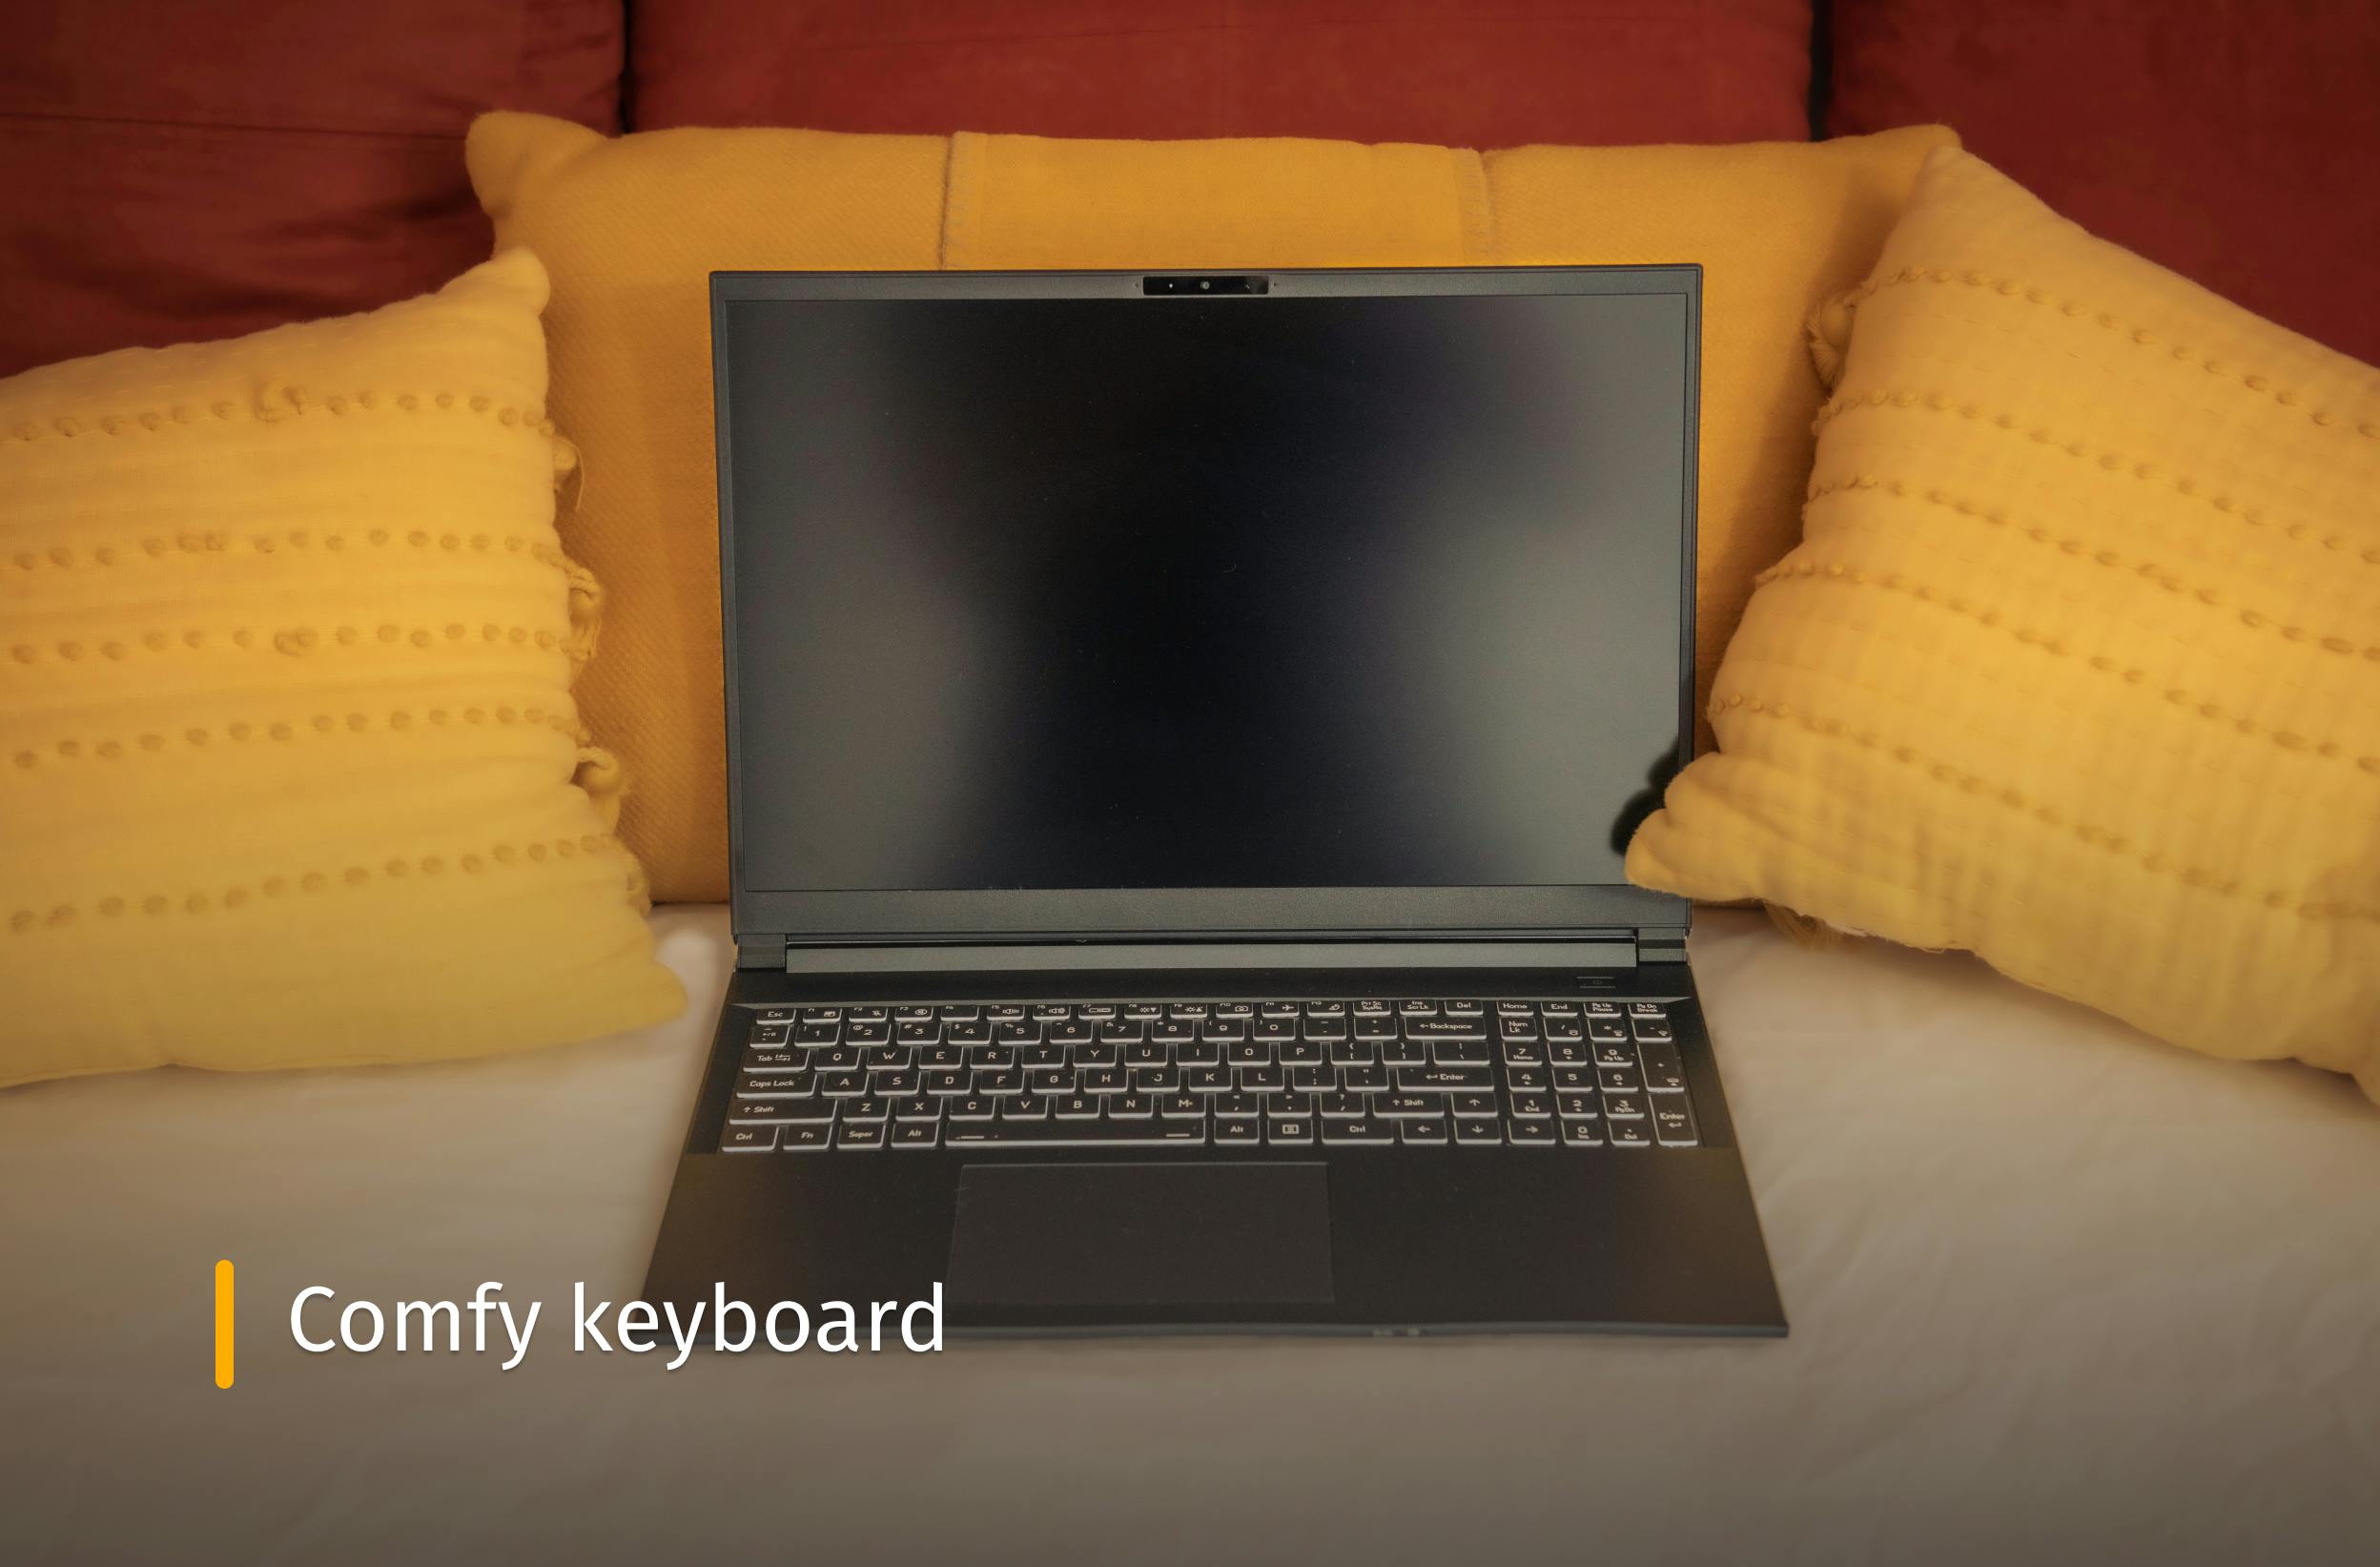 Darter Pro on a bed with yellow pillows and text that reads "Comfy keyboard"